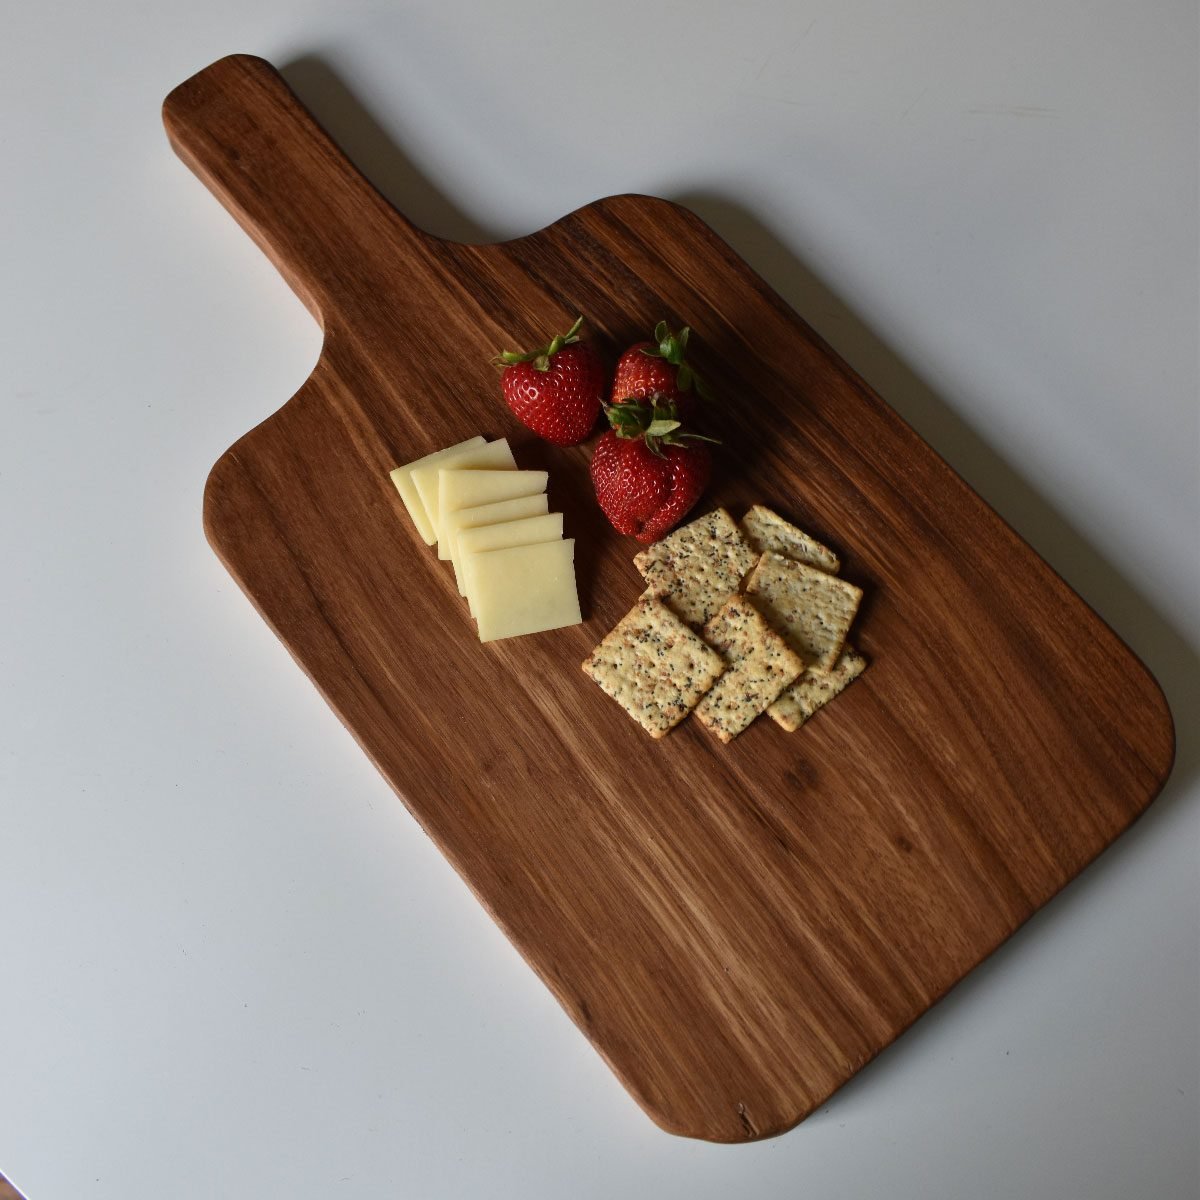 How To Make a DIY Charcuterie Board